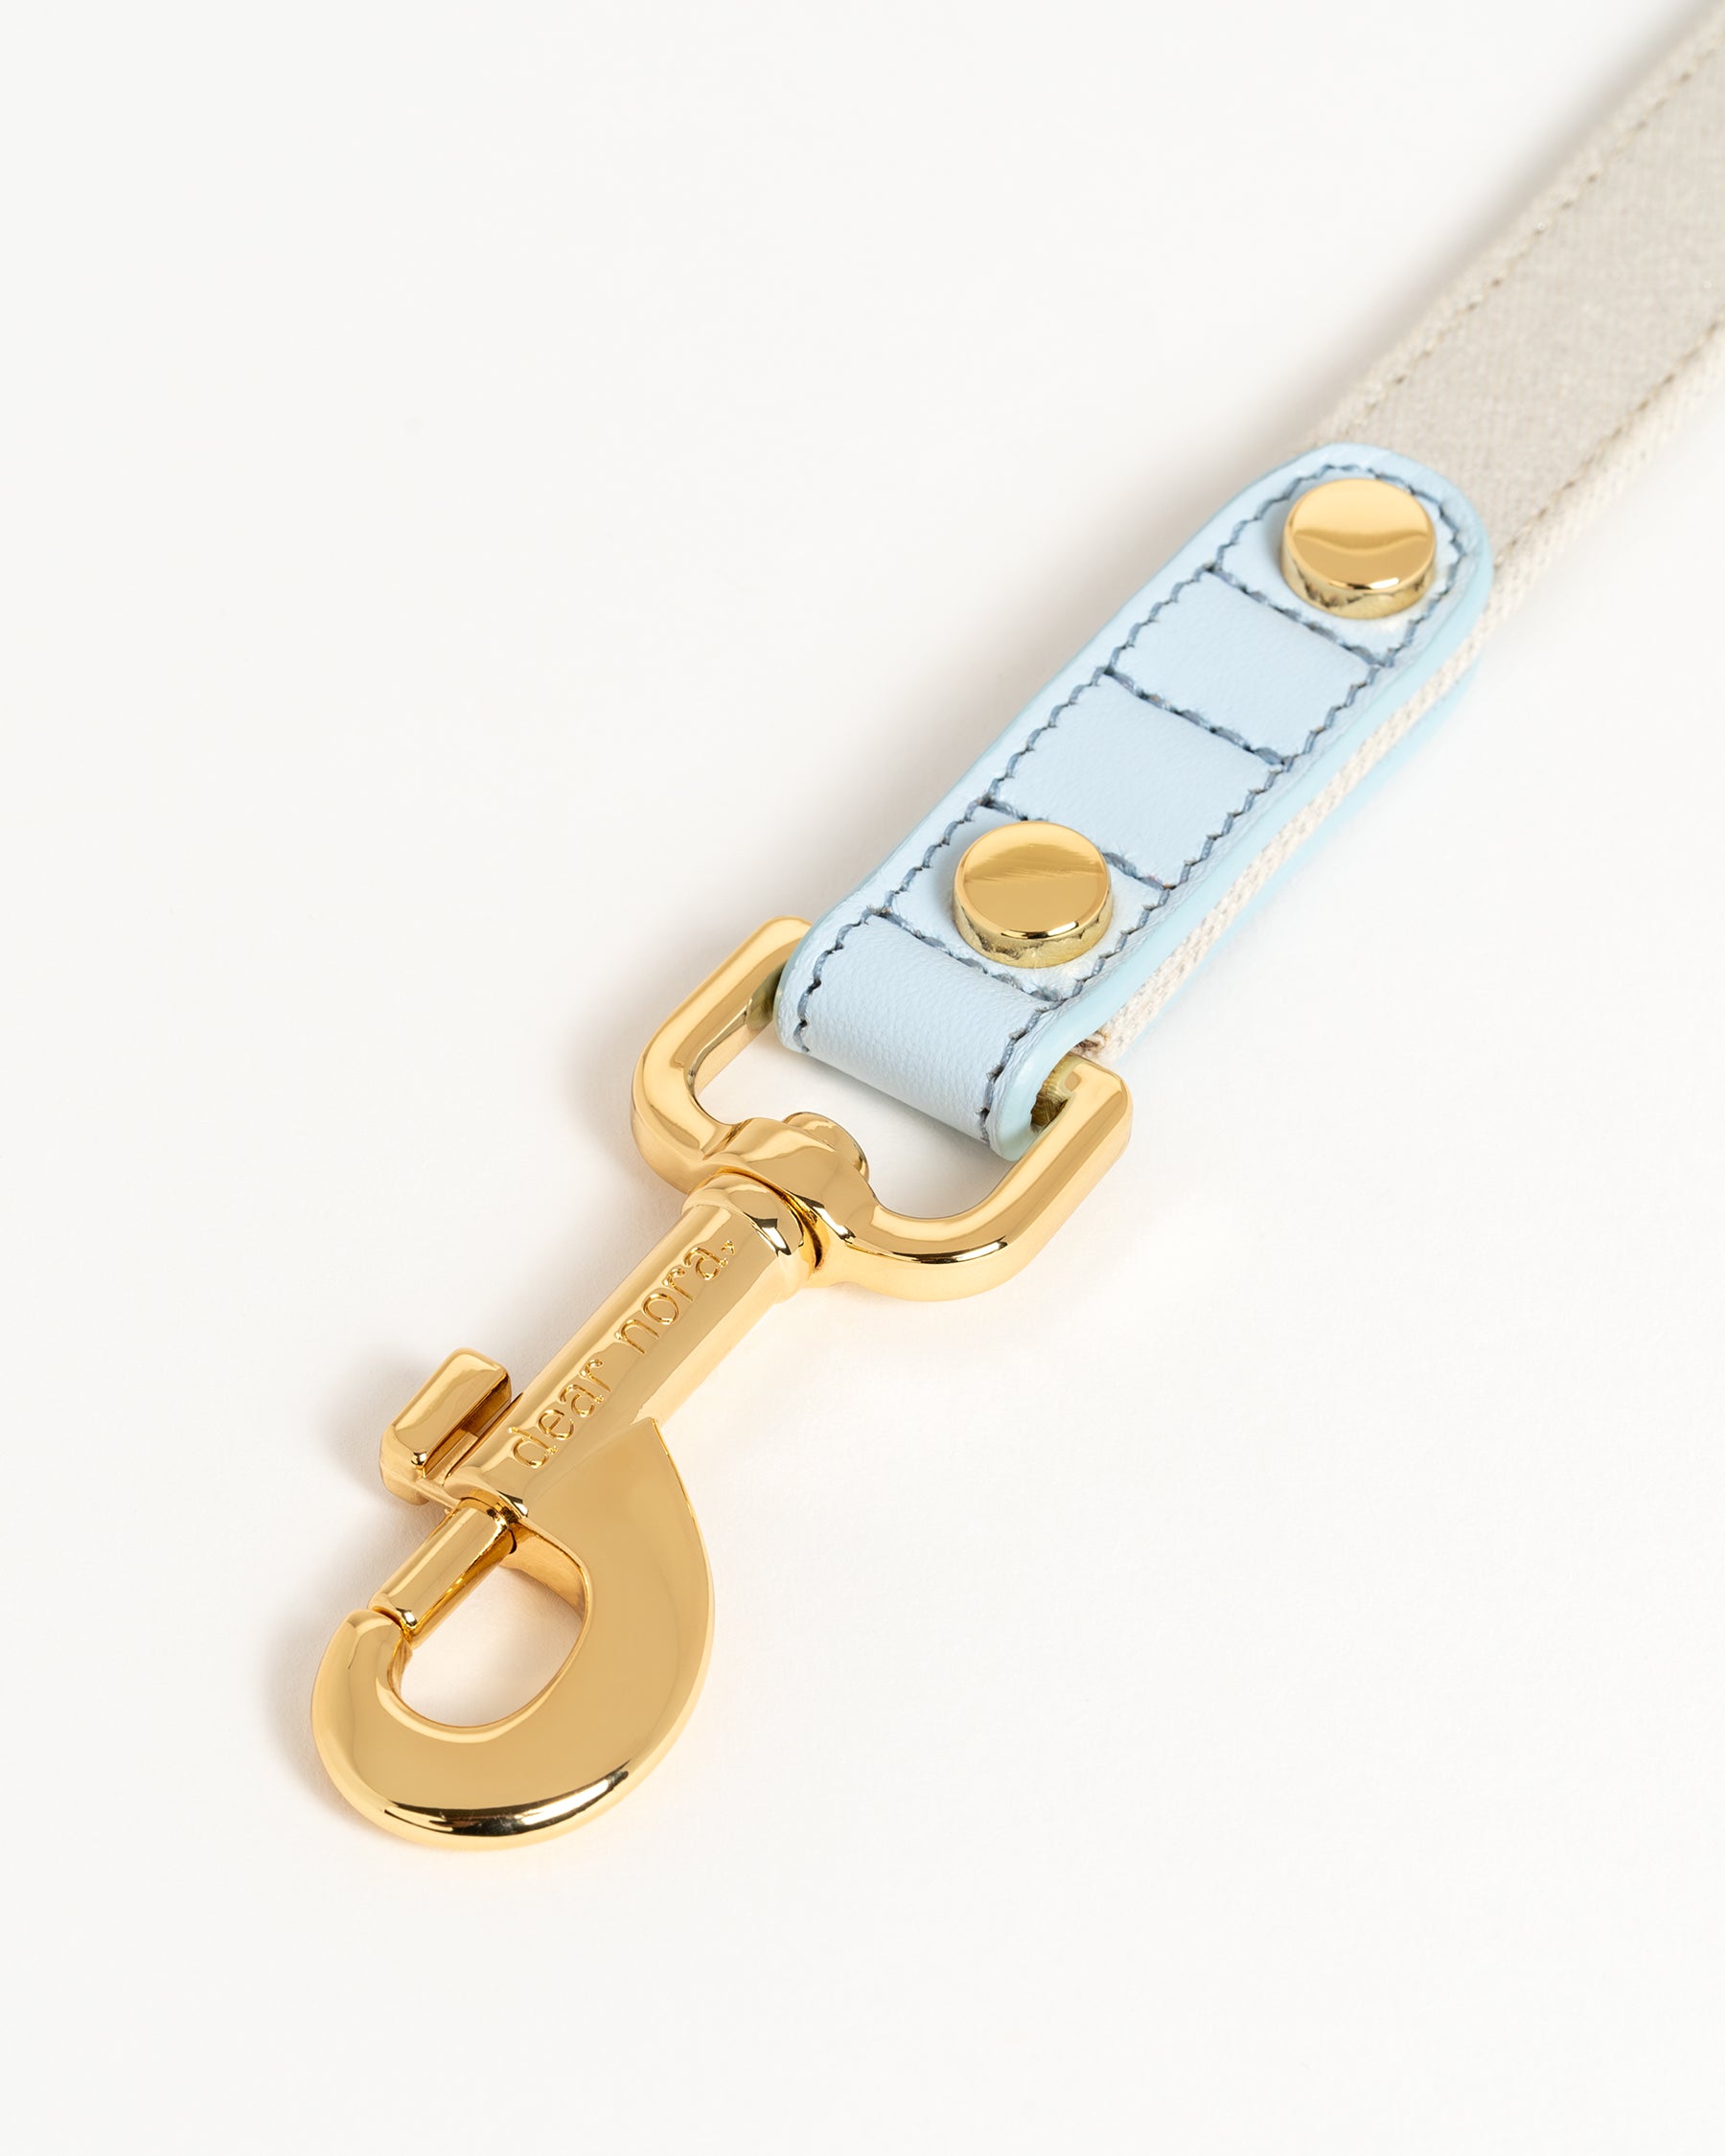 Dear Nora Sapphire dog leash hook - baby blue leather, cream sparkle fabric and 24k plated hardware - close up shot